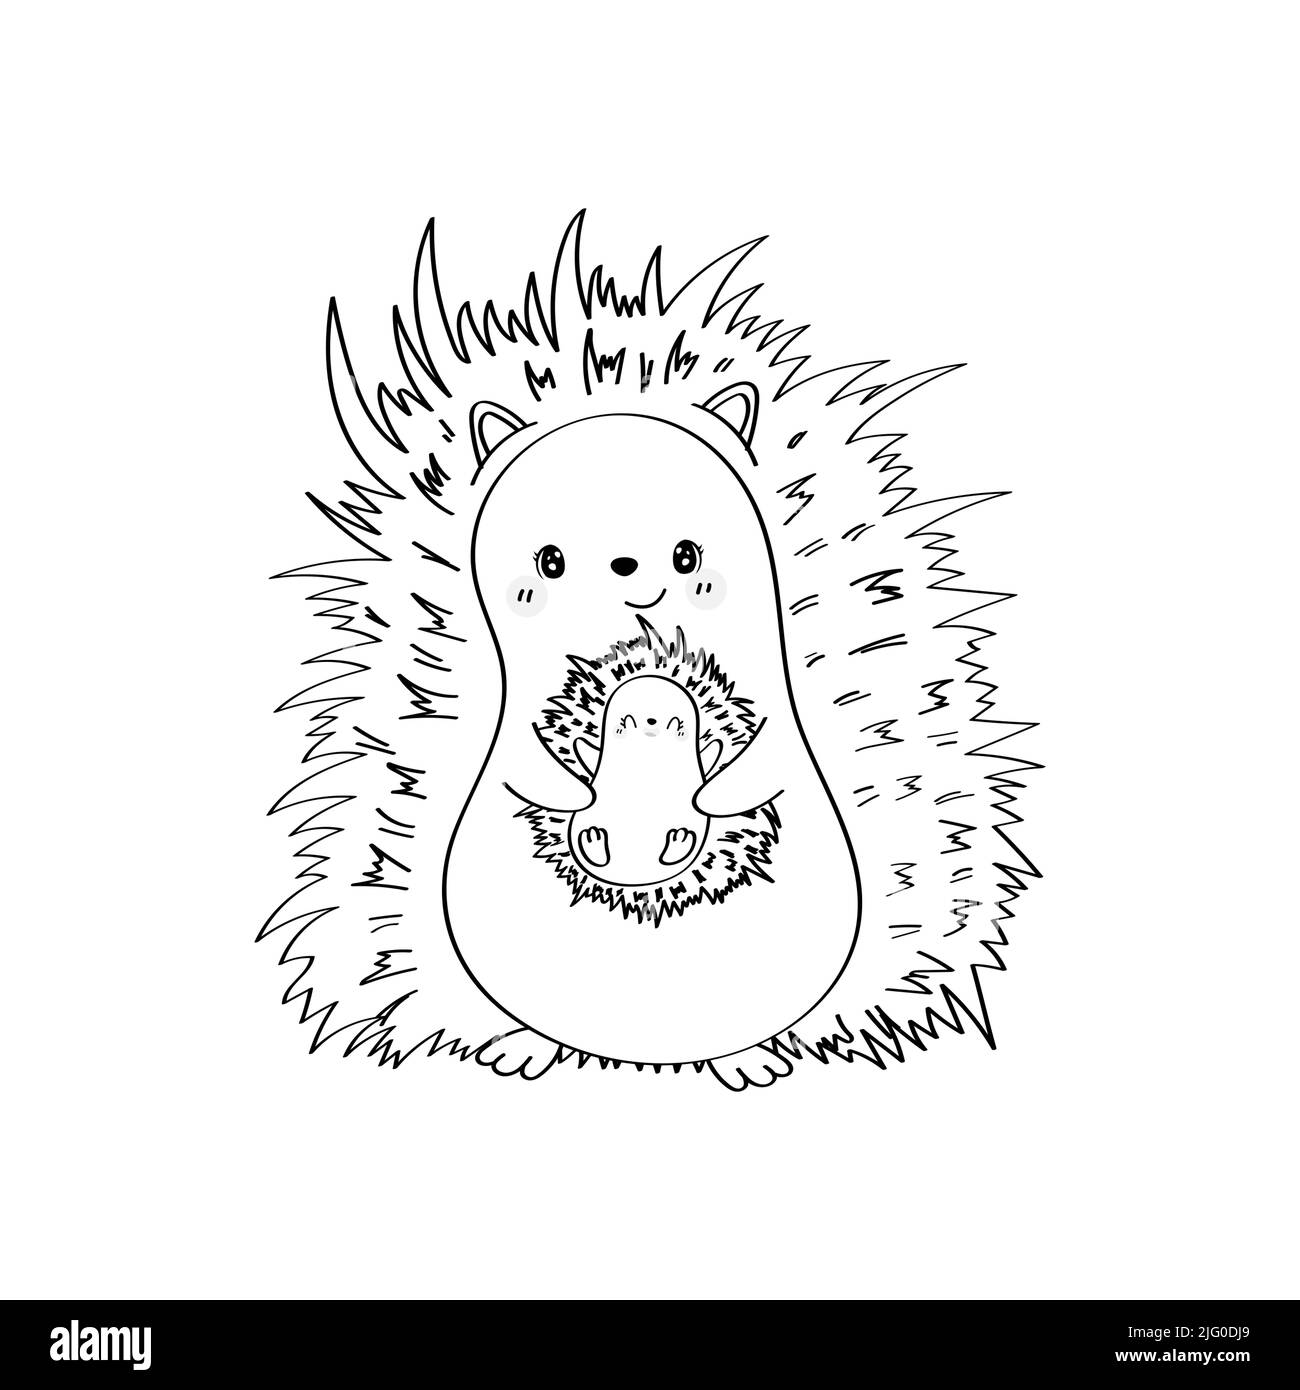 Hedgehog Clipart Coloring Page in Cute Cartoon Style Beautiful Clip Art Hedgehog Black and White. Vector Illustration of an Forest Animal for Prints Stock Vector